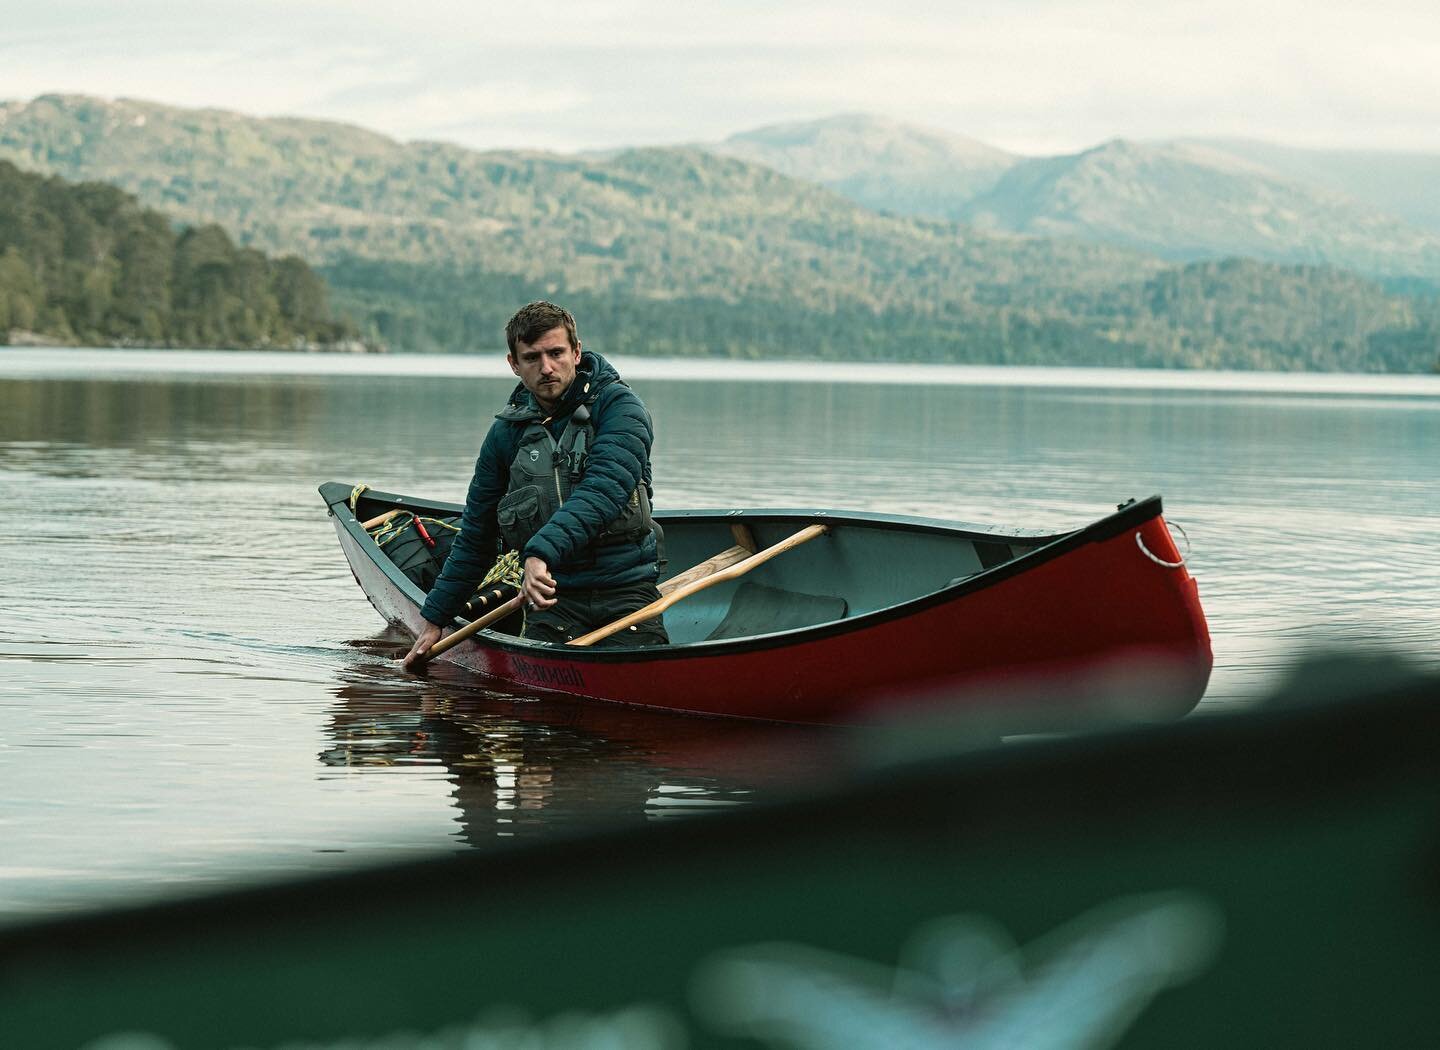 In 2019, Ian Finch and I paddled about six hundred miles of the Tennessee River in the USA as part of our journey retracing the Cherokee Trail of Tears. We had no idea that three years later, we&rsquo;d be paddling in Scotland with Brad Collett from 